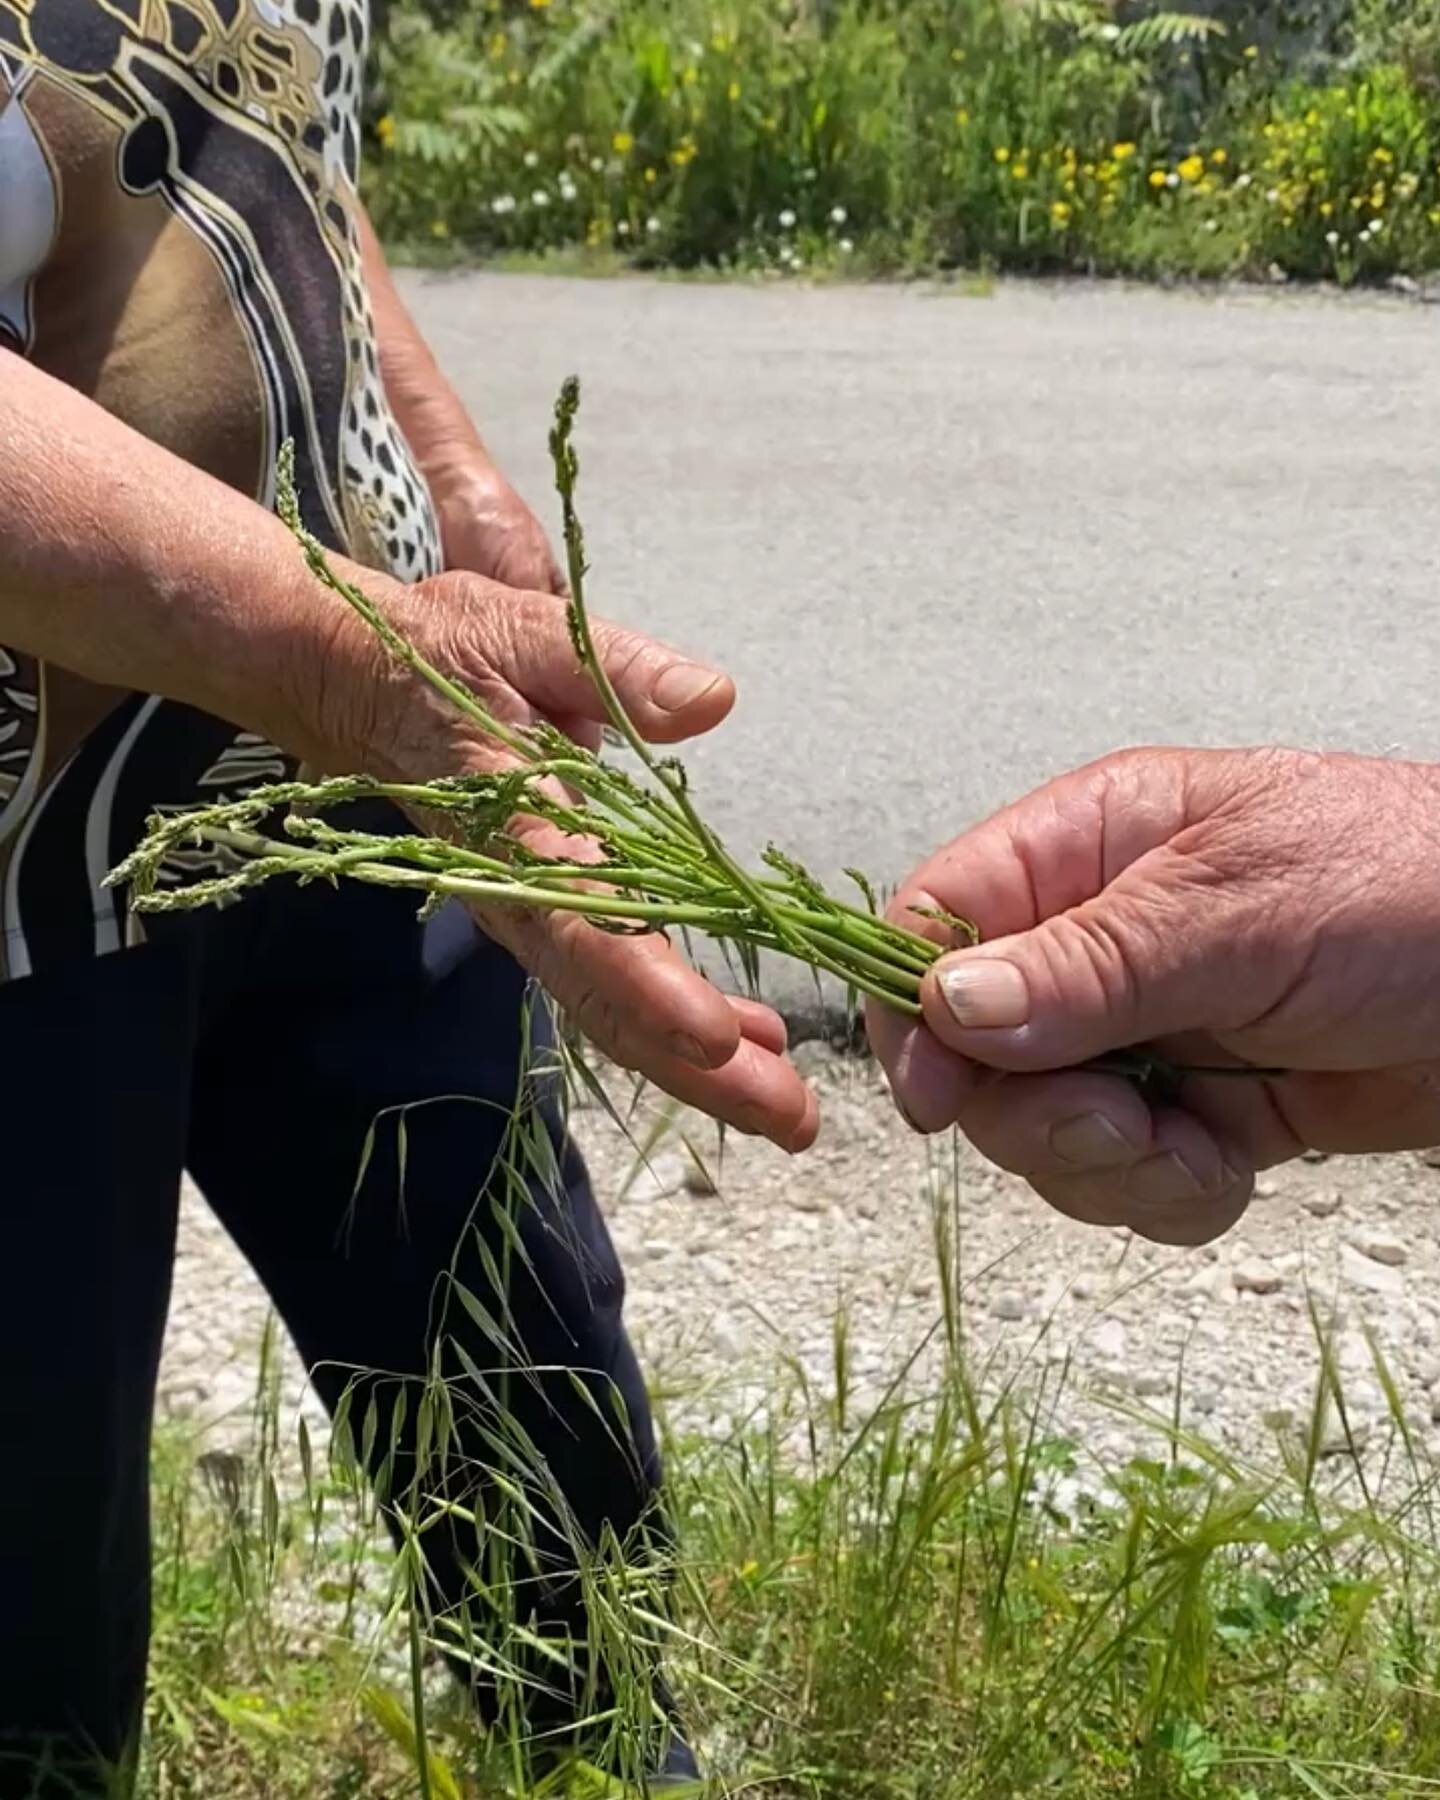 An outing to the castle above the village turned into a wild asparagus (asparagi) foraging expedition with two expert guides. My cousins Teresa and Luigi gathered enough asparagus for a frittata for pranzo. Even though it was late in the season, they